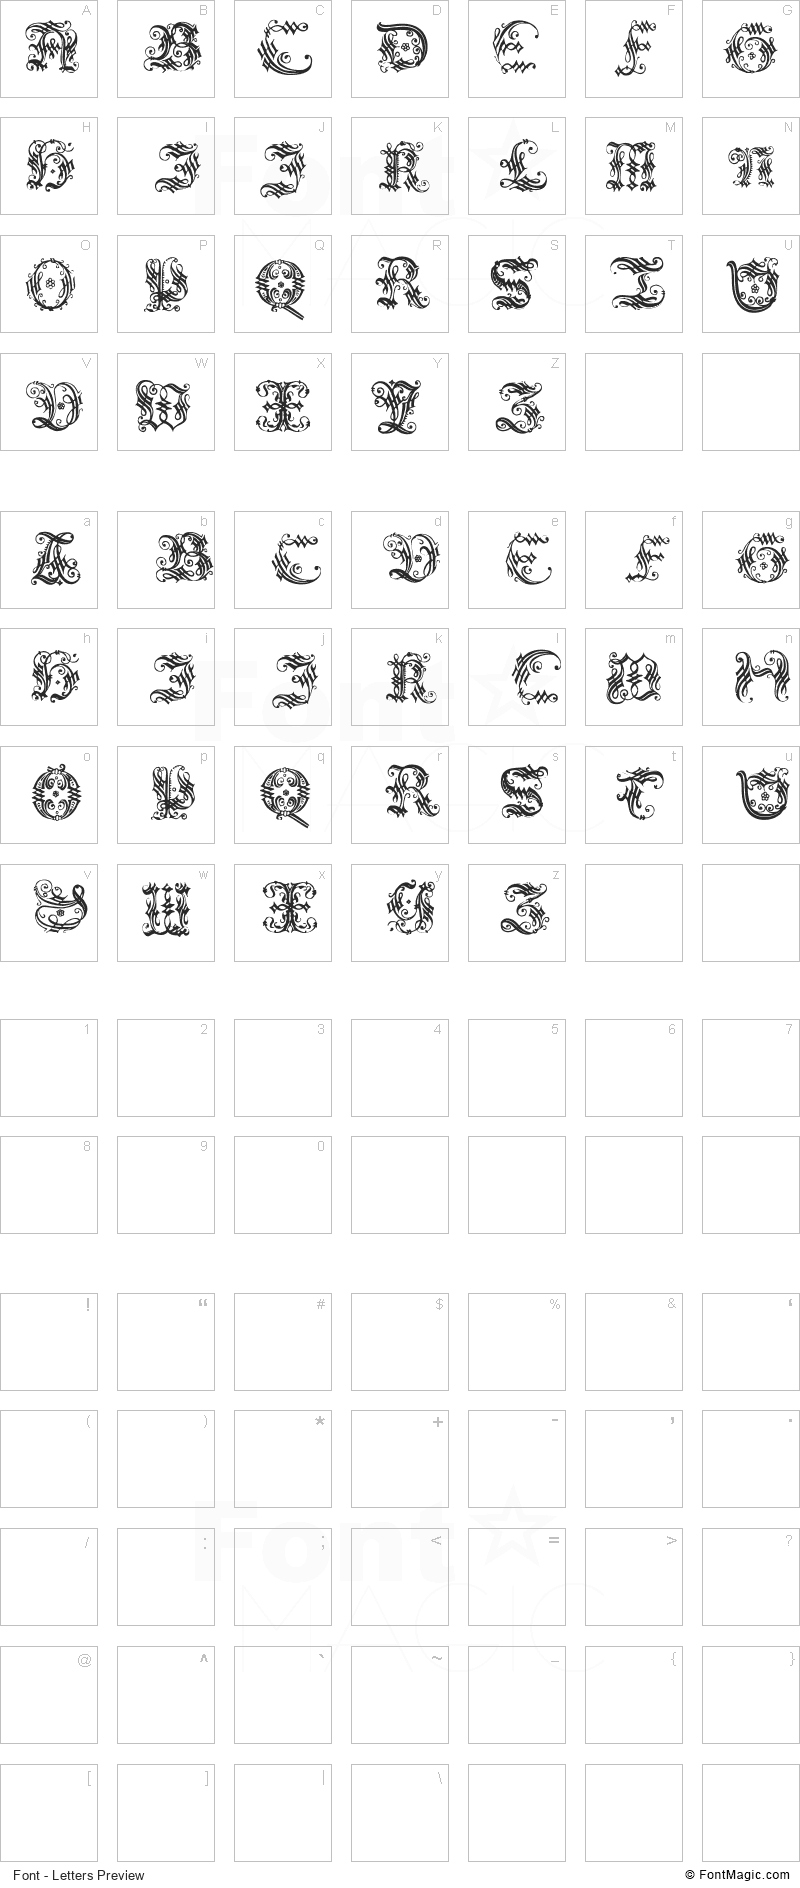 Ornamental Initial Font - All Latters Preview Chart